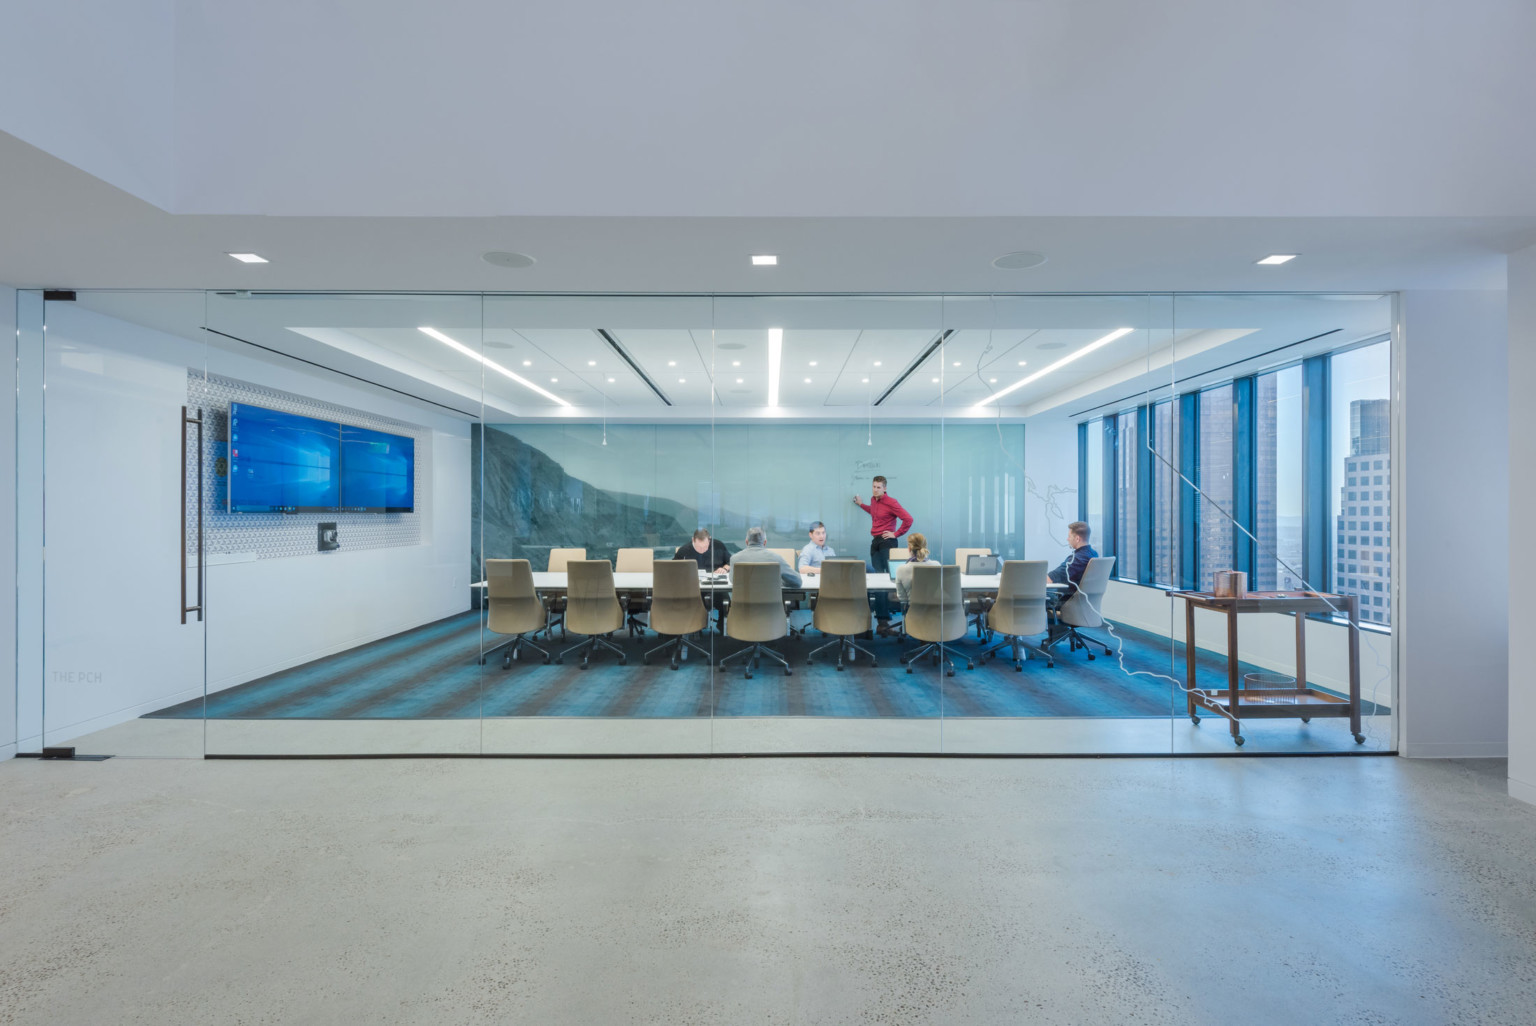 DLR Group's Los Angeles office with glass walled conference room, large windows, wall mural, and screen at end of long table